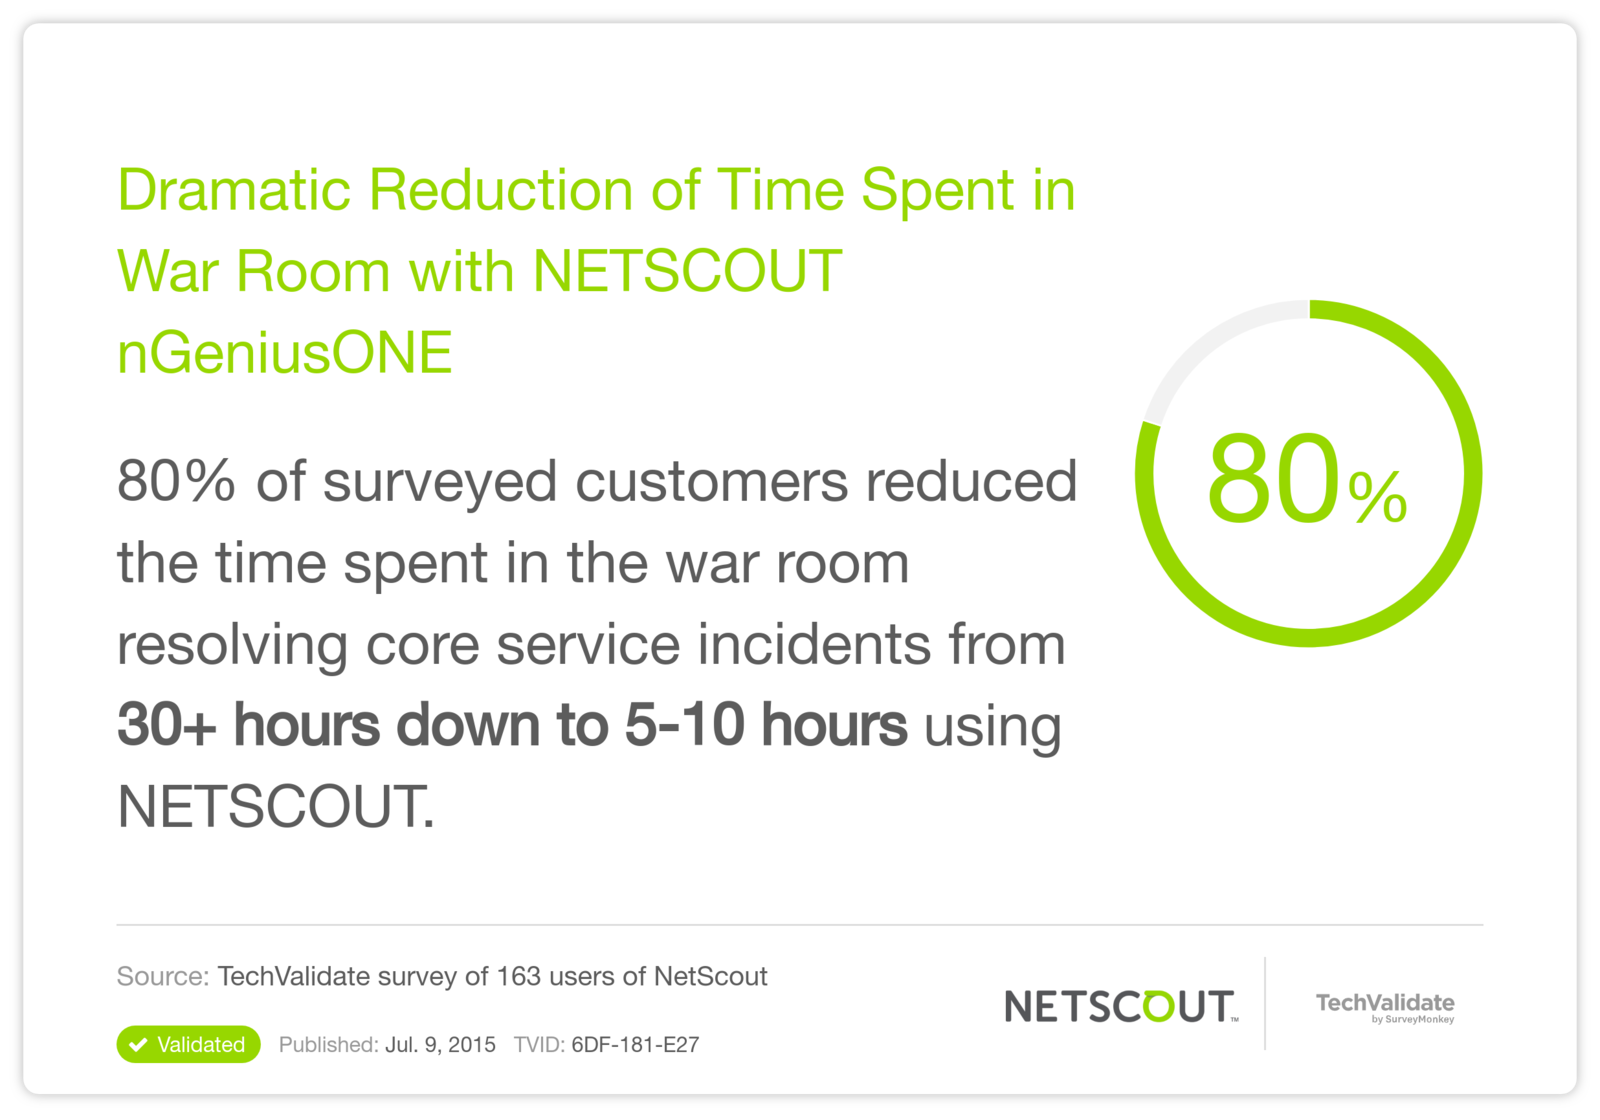 Dramatic Reduction of Time Spent in War Room with NETSCOUT nGeniusONE